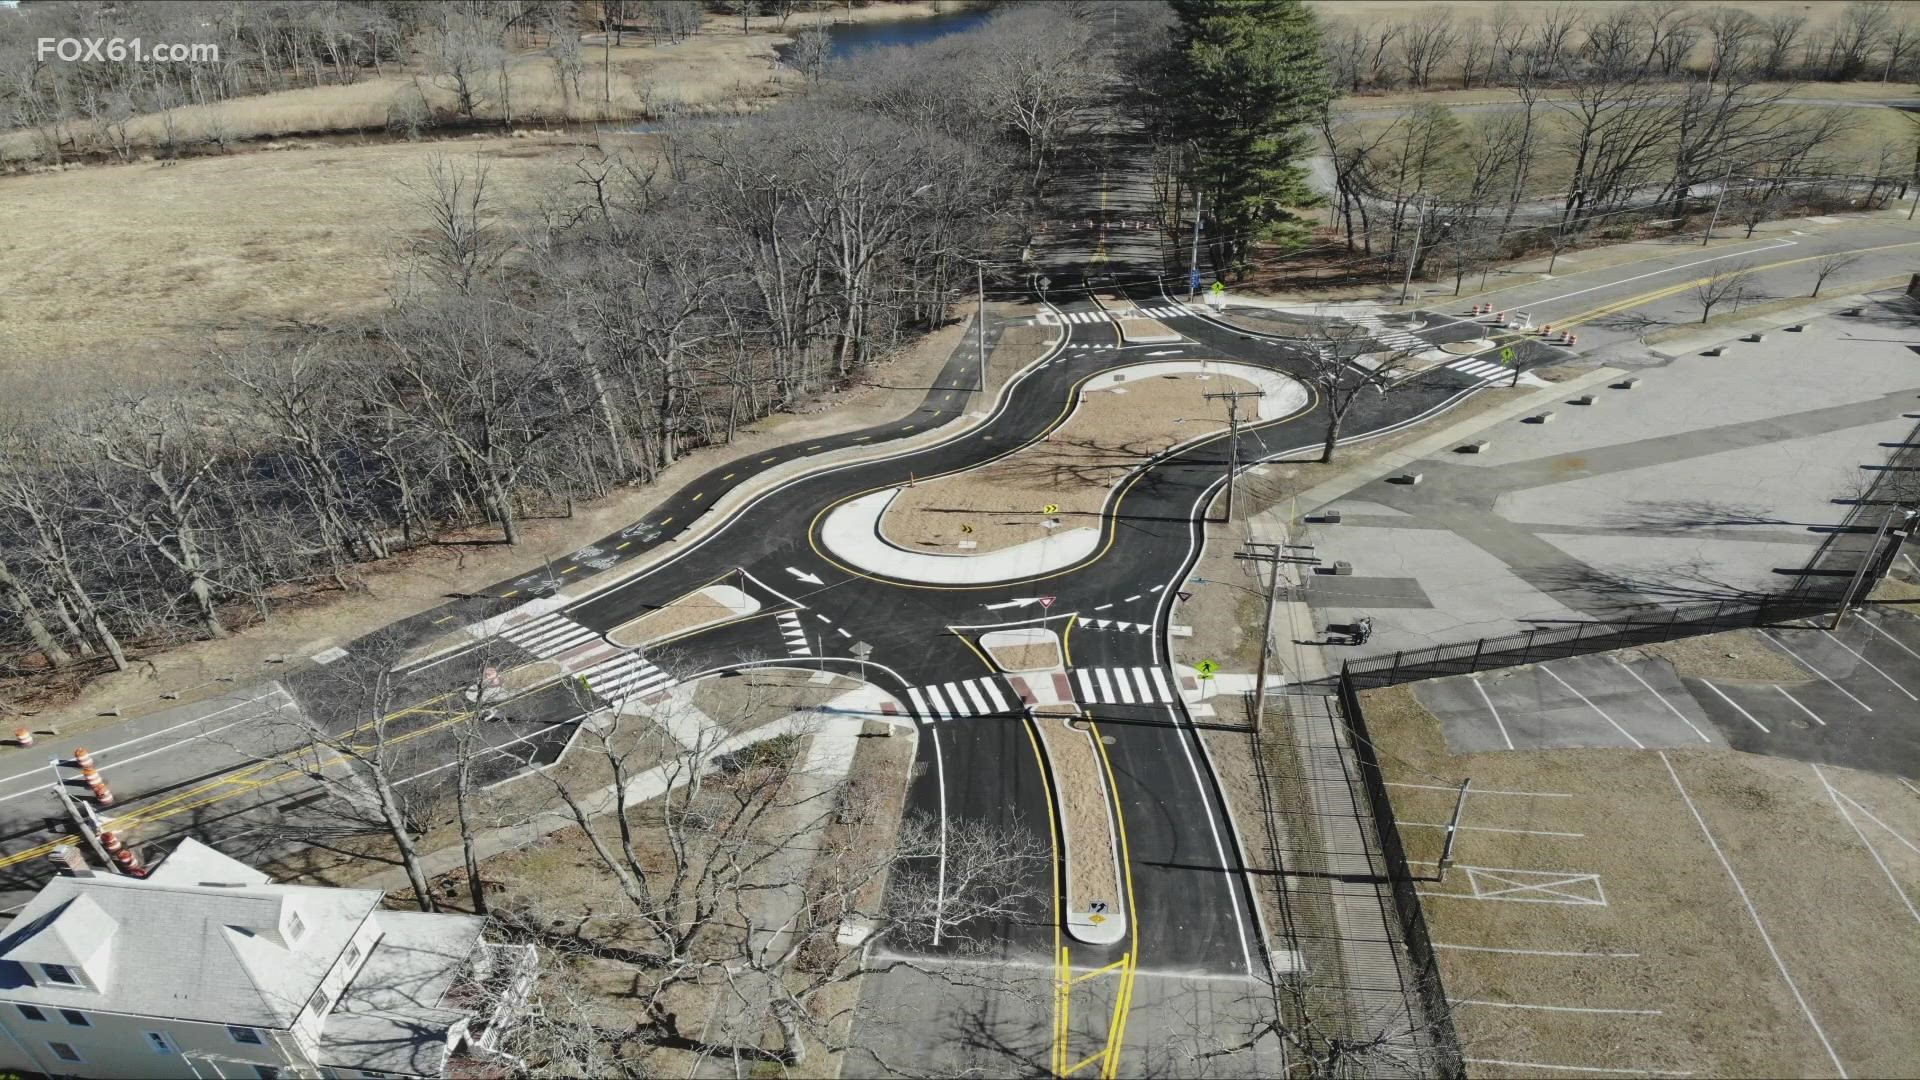 The unique design of the new roundabout tries to combat the problem of people speeding through the area.